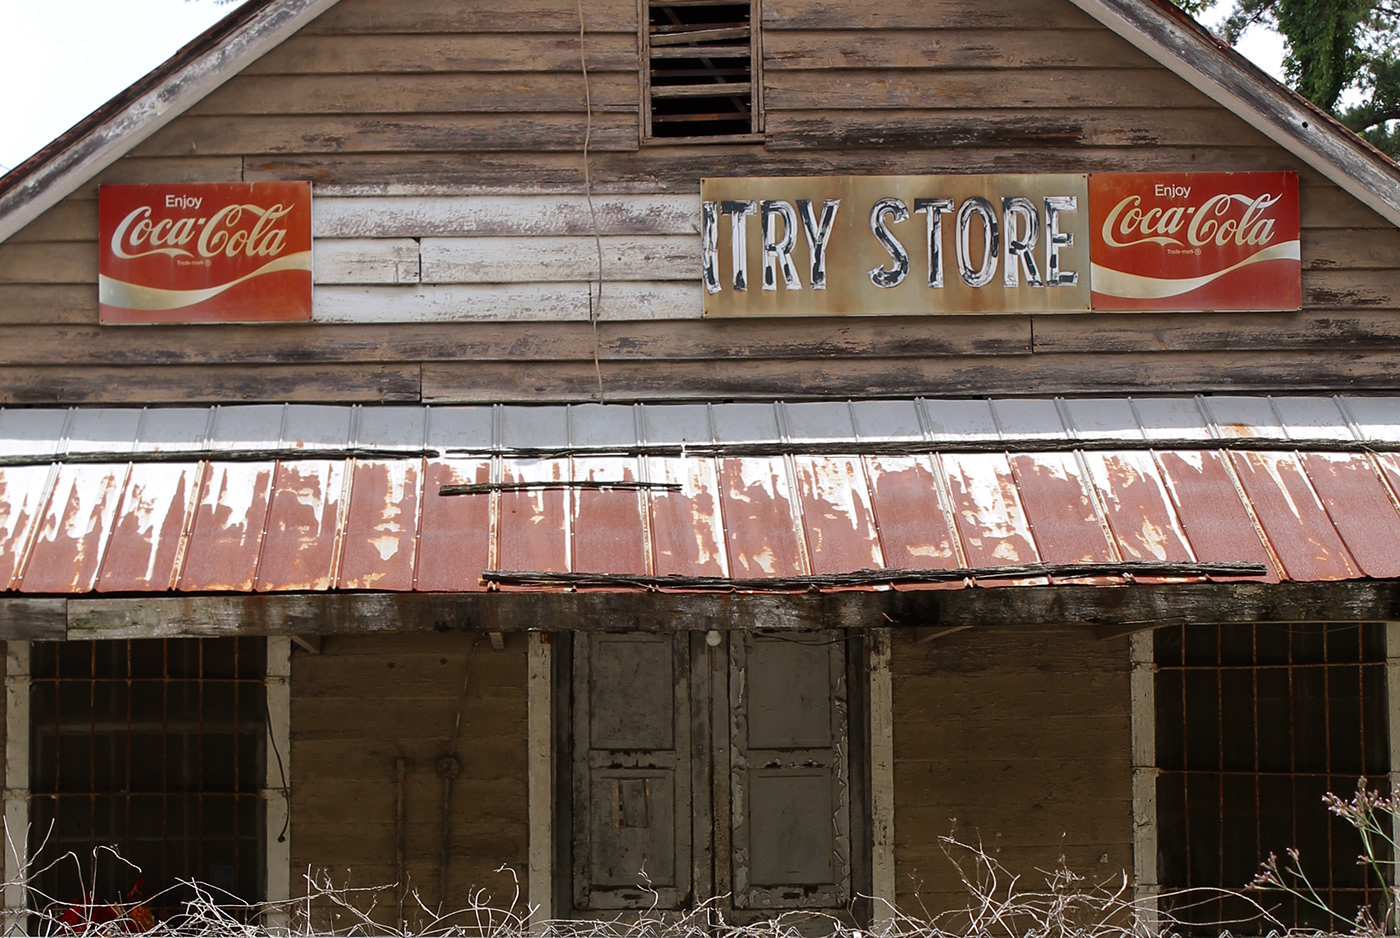 Old country store on back roads between Charleston and Columbia, SC.